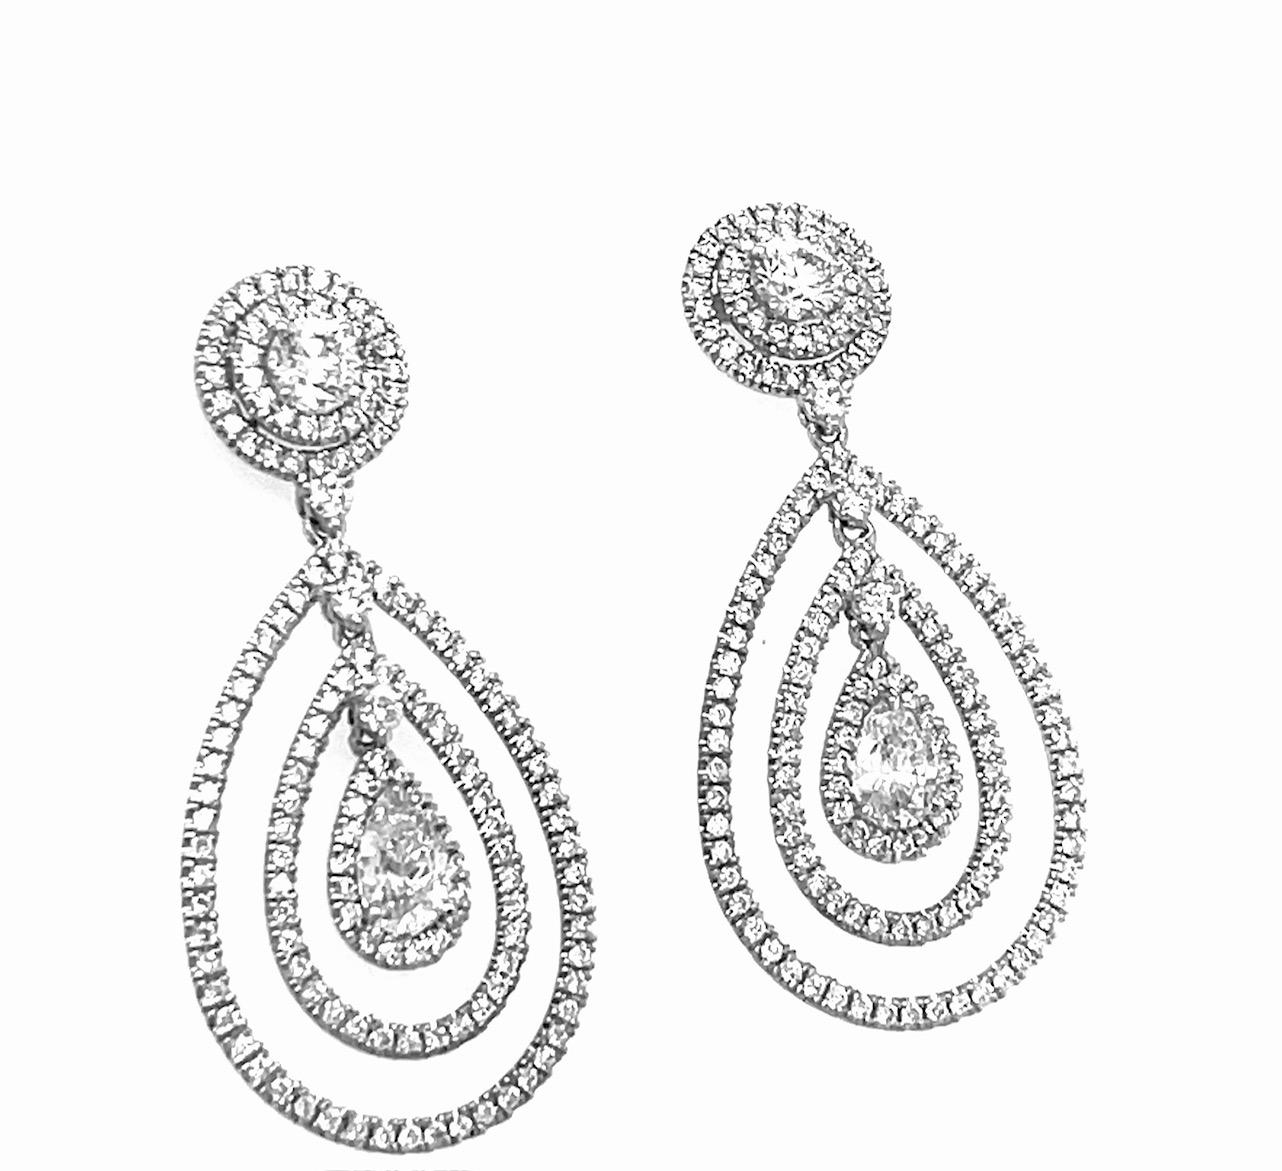 Pear Shape and Round Diamond Dangling Earrings 18K White Gold

Pear shape weighs 0.48 carat E Color SI1 Clarity

With Stuller Certificate # 203165

Pear shape weighs 0.51 carat E Color SI2 Clarity

With GIA Certificate # 1149357354

Round Brilliant